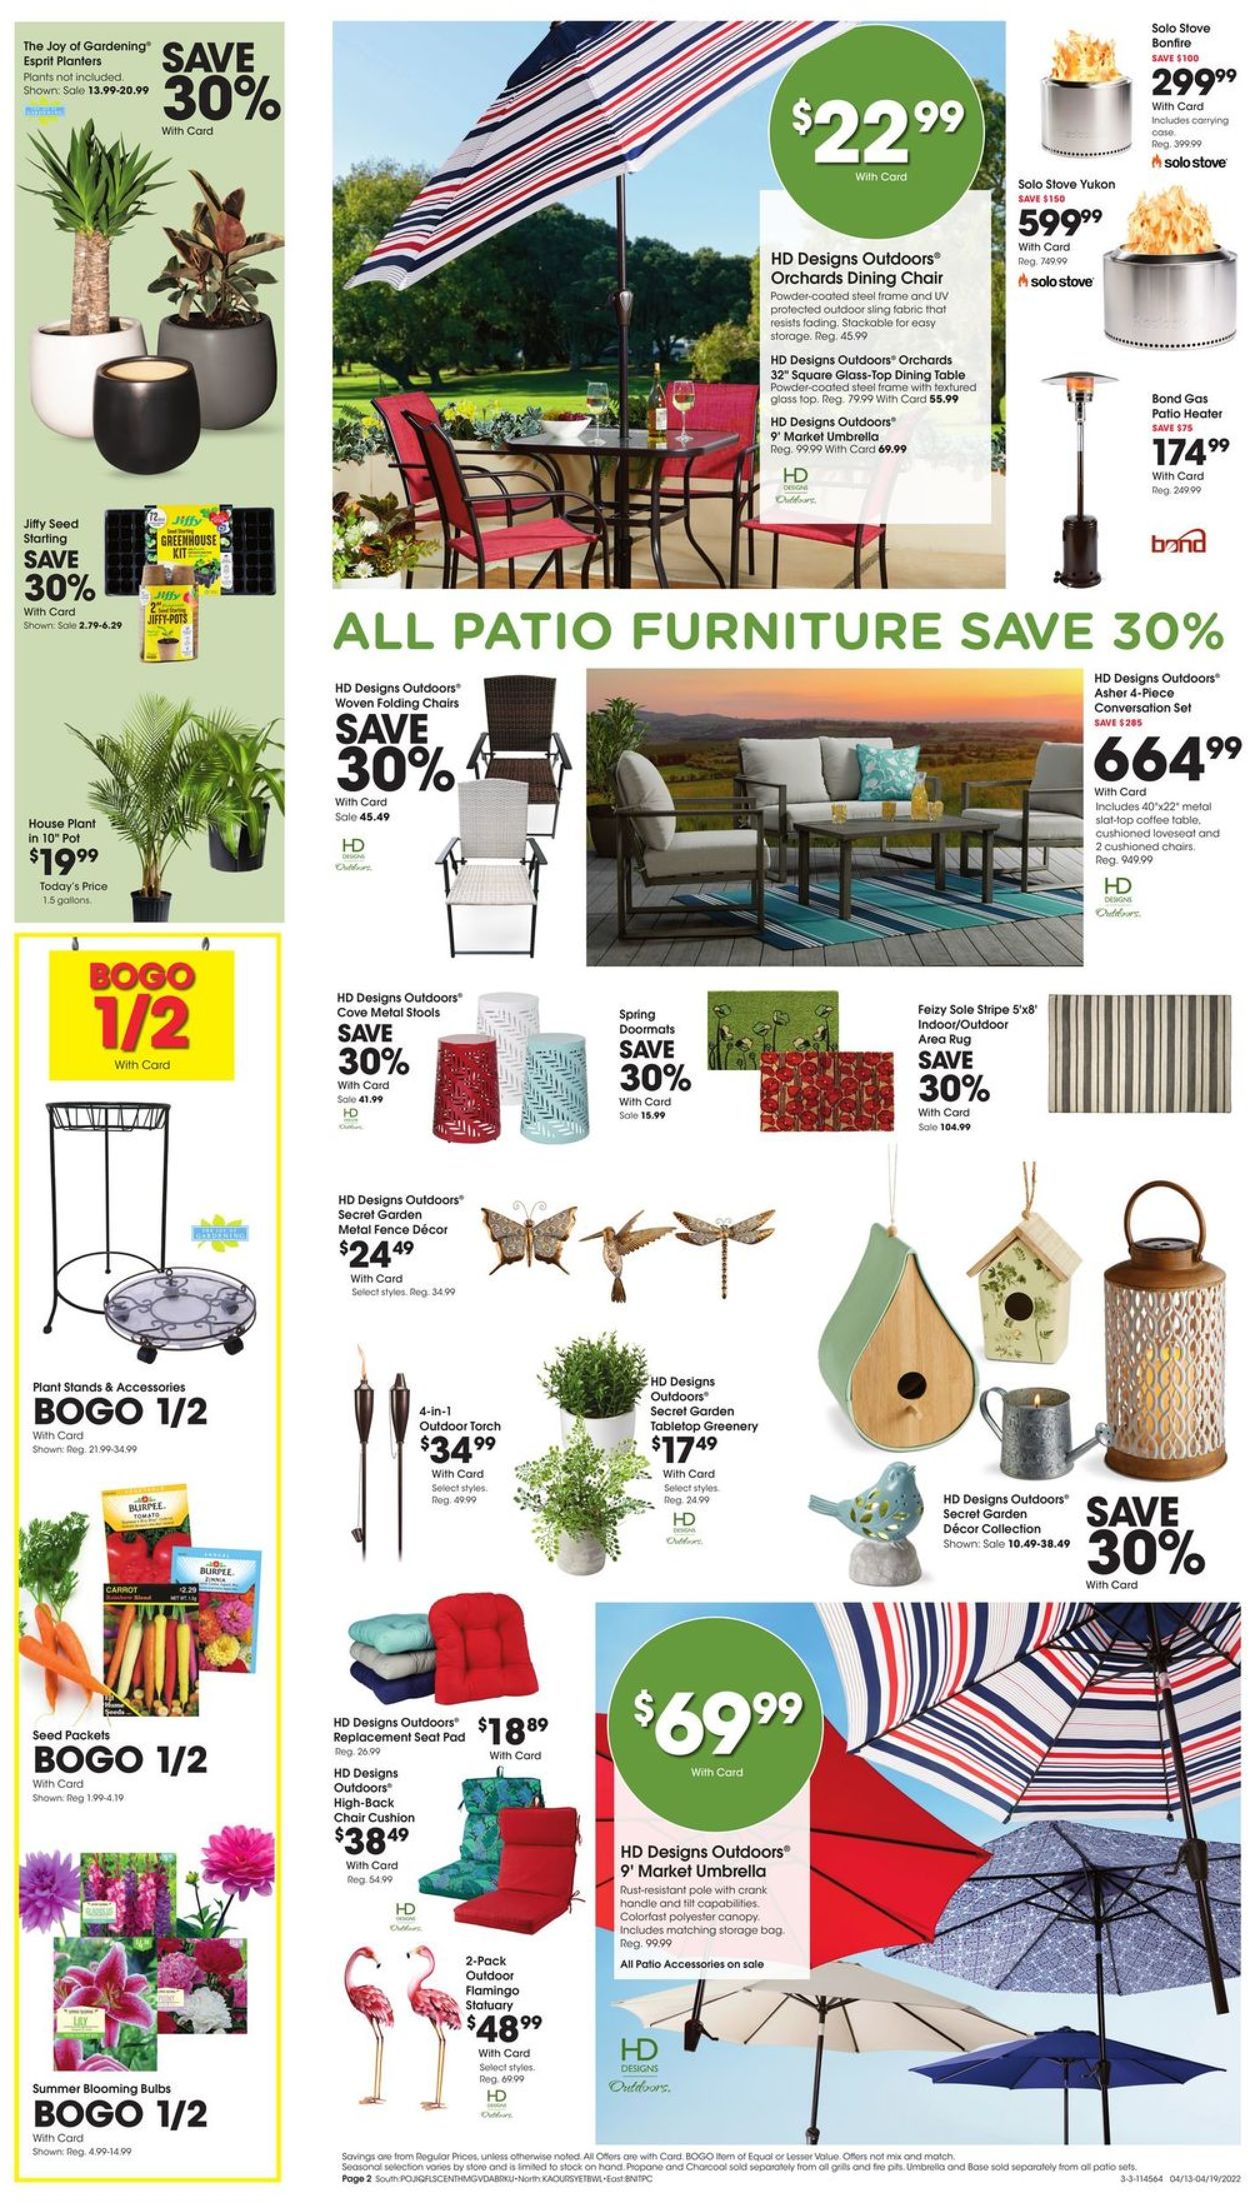 Fred Meyer EASTER 2022 Weekly Ad Circular - valid 04/13-04/19/2022 (Page 2)